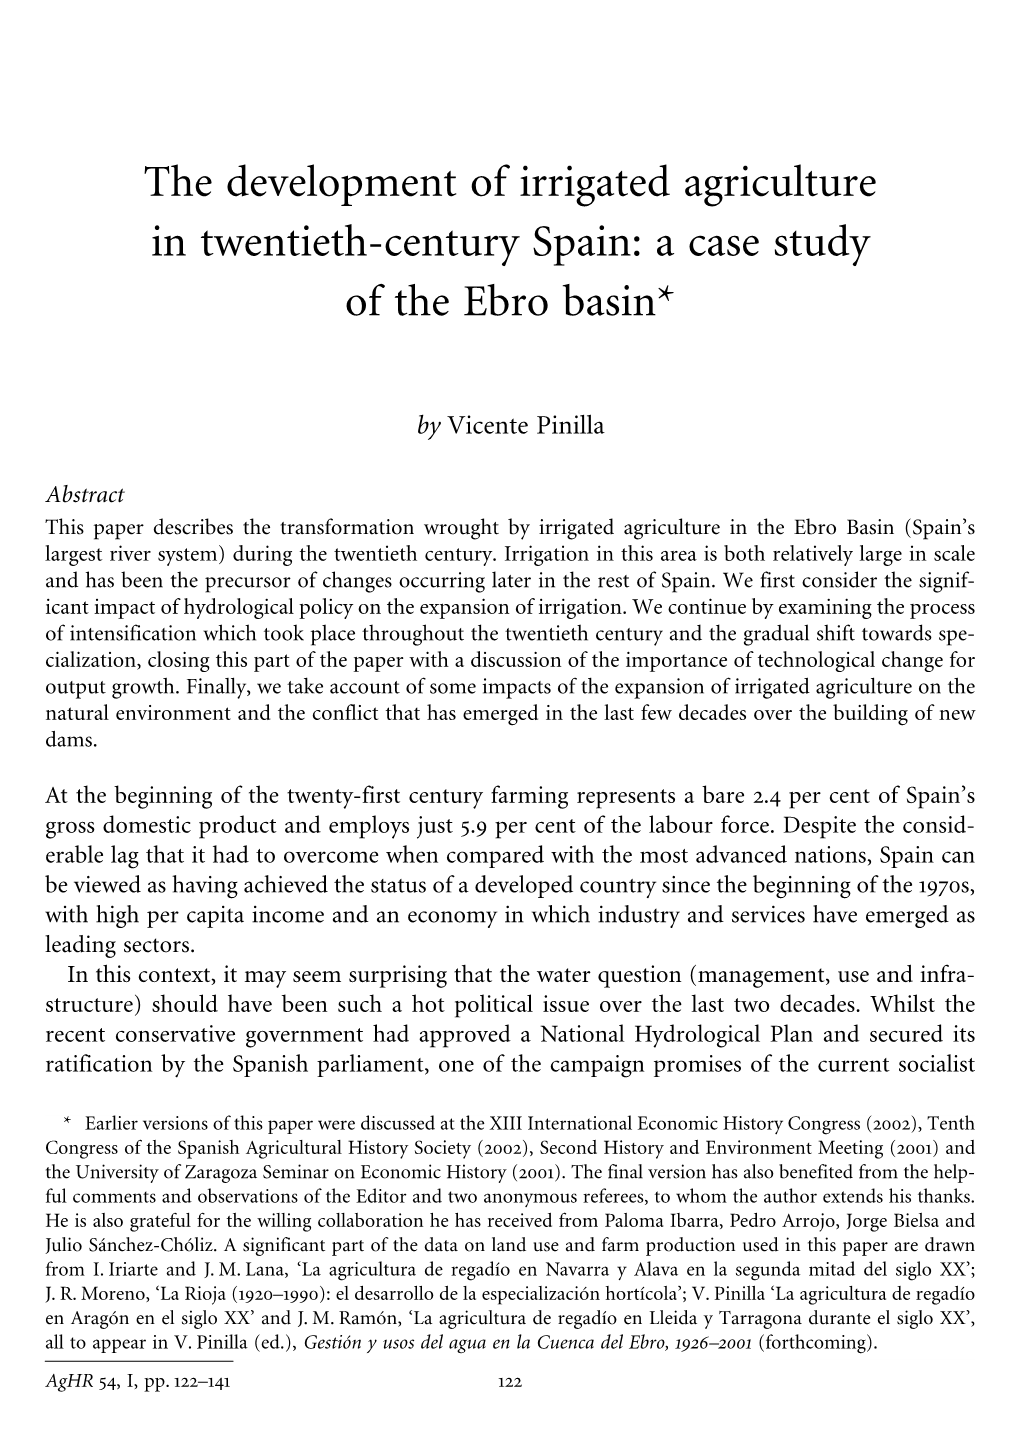 The Development of Irrigated Agriculture in Twentieth-Century Spain: a Case Study of the Ebro Basin*